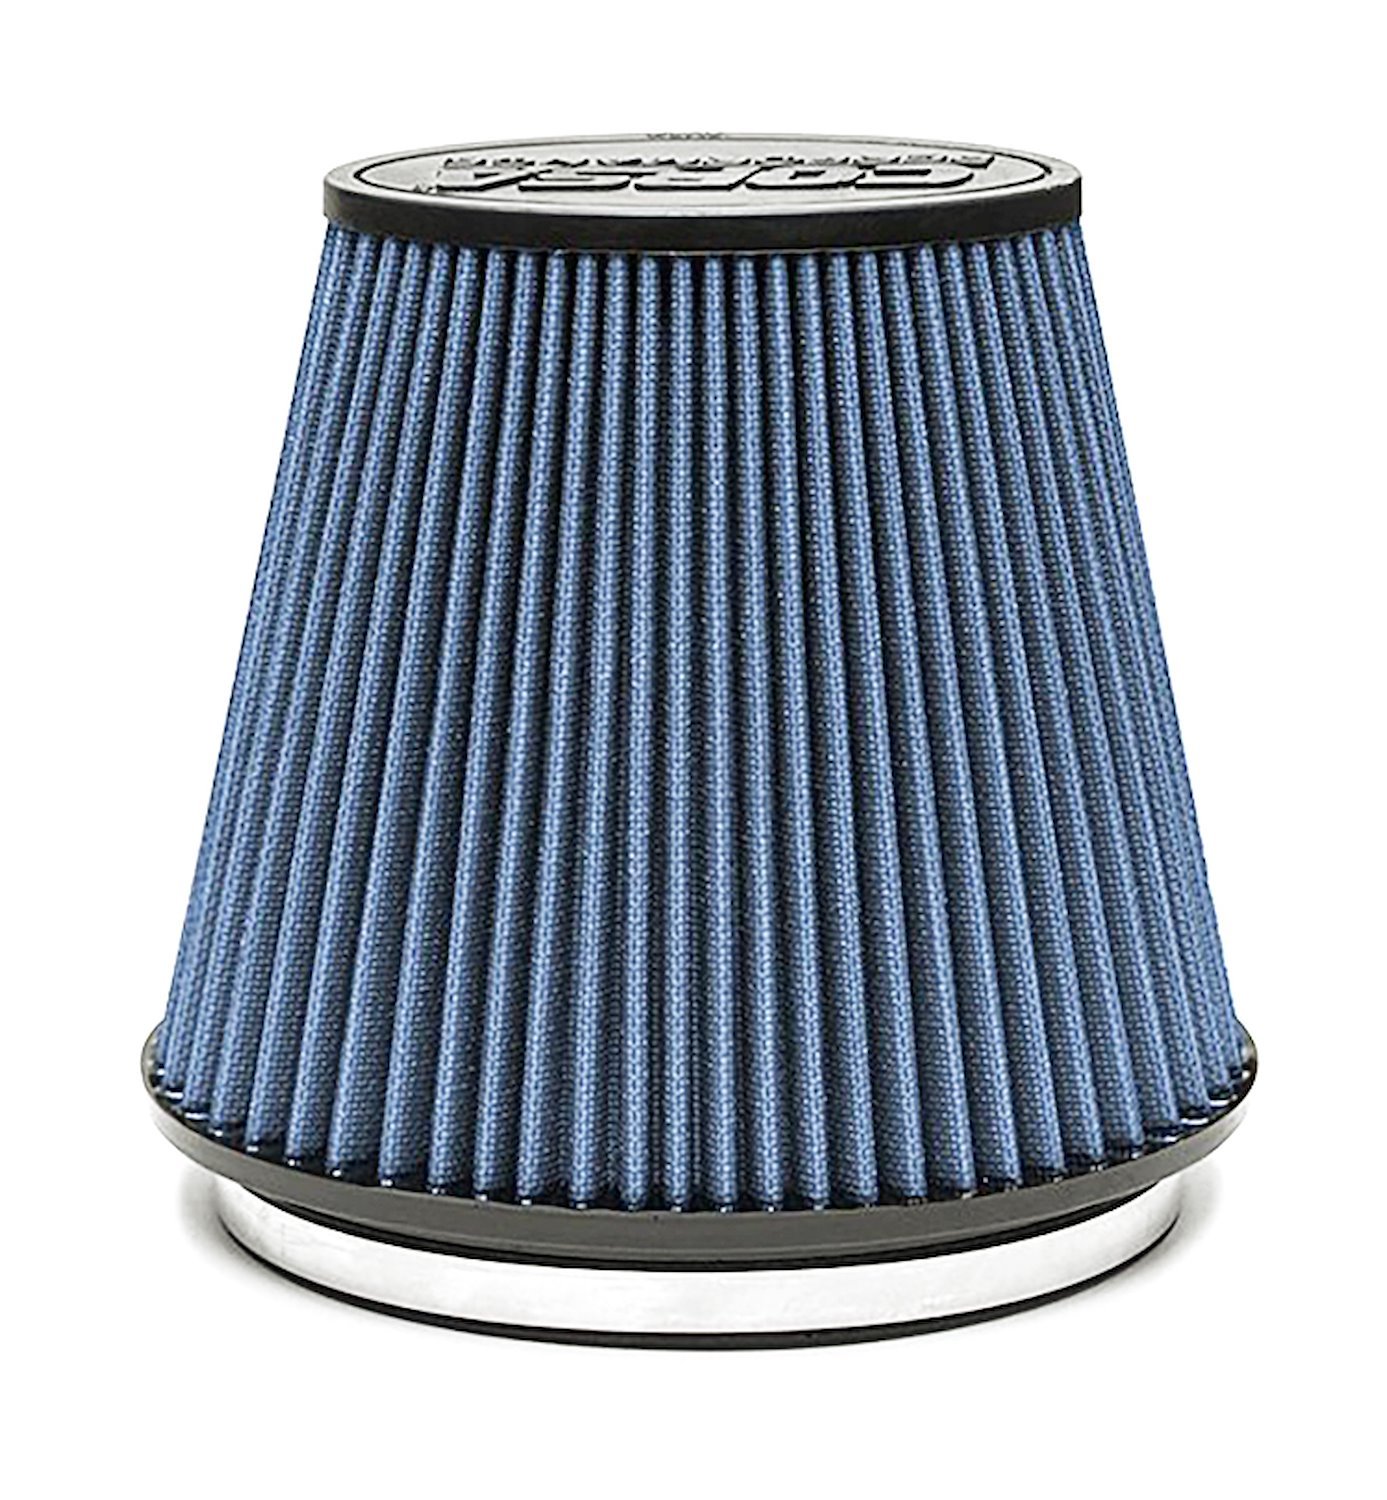 Maxflow5 Oiled Replacement Air Filter for 44001, 44002 Corsa Air Intakes